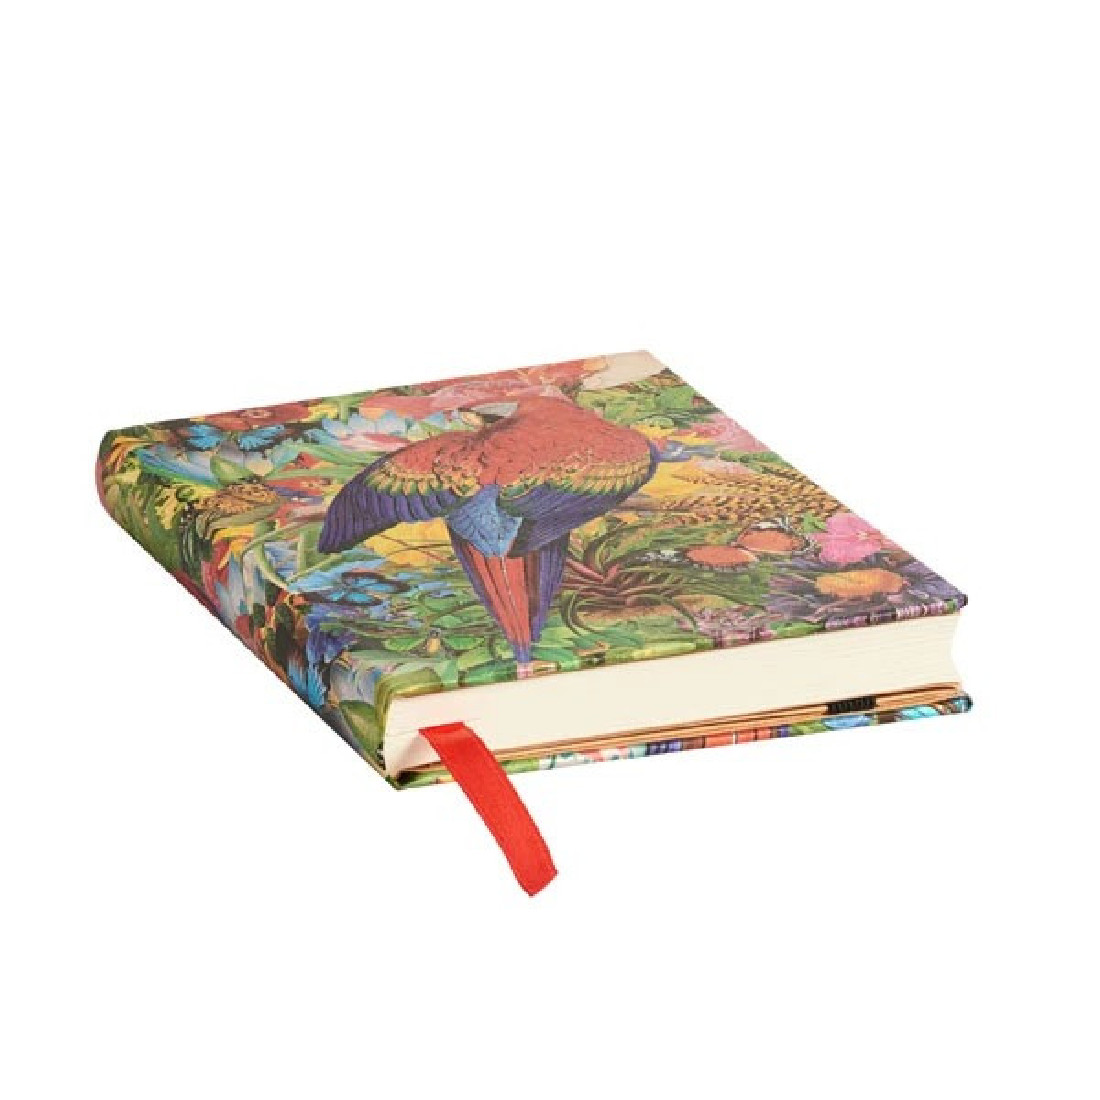 Paperblanks notebook Nature Montages Tropical Garden lined Mini 9,5 X 14cm